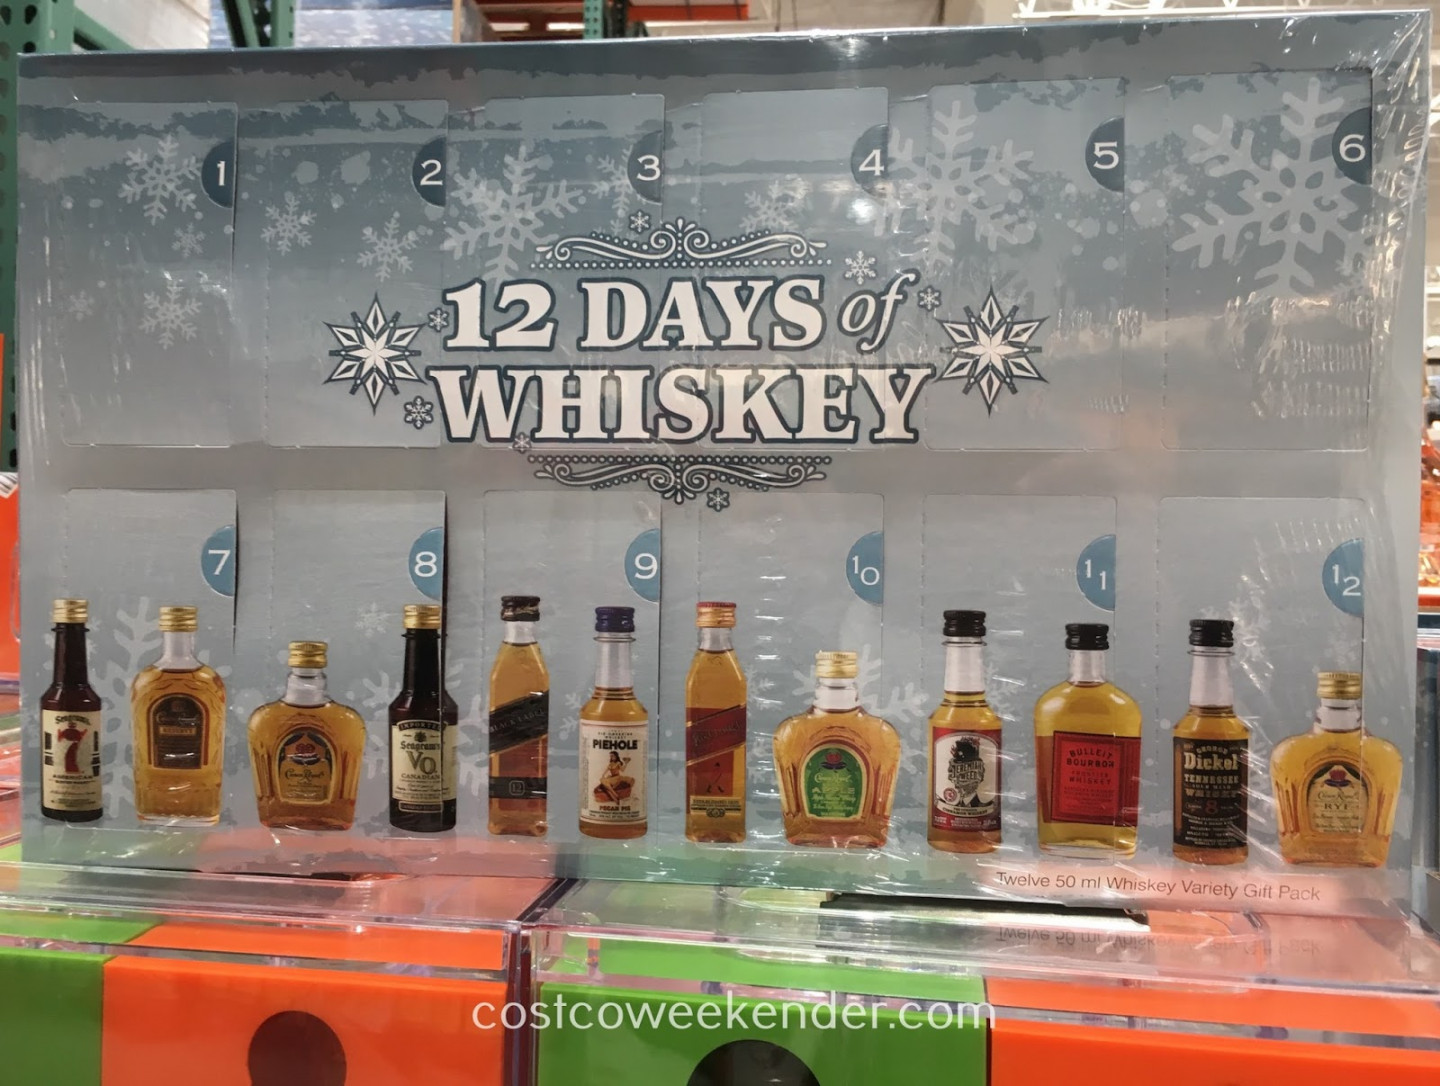 Days of Whiskey Variety Gift Pack  Costco Weekender